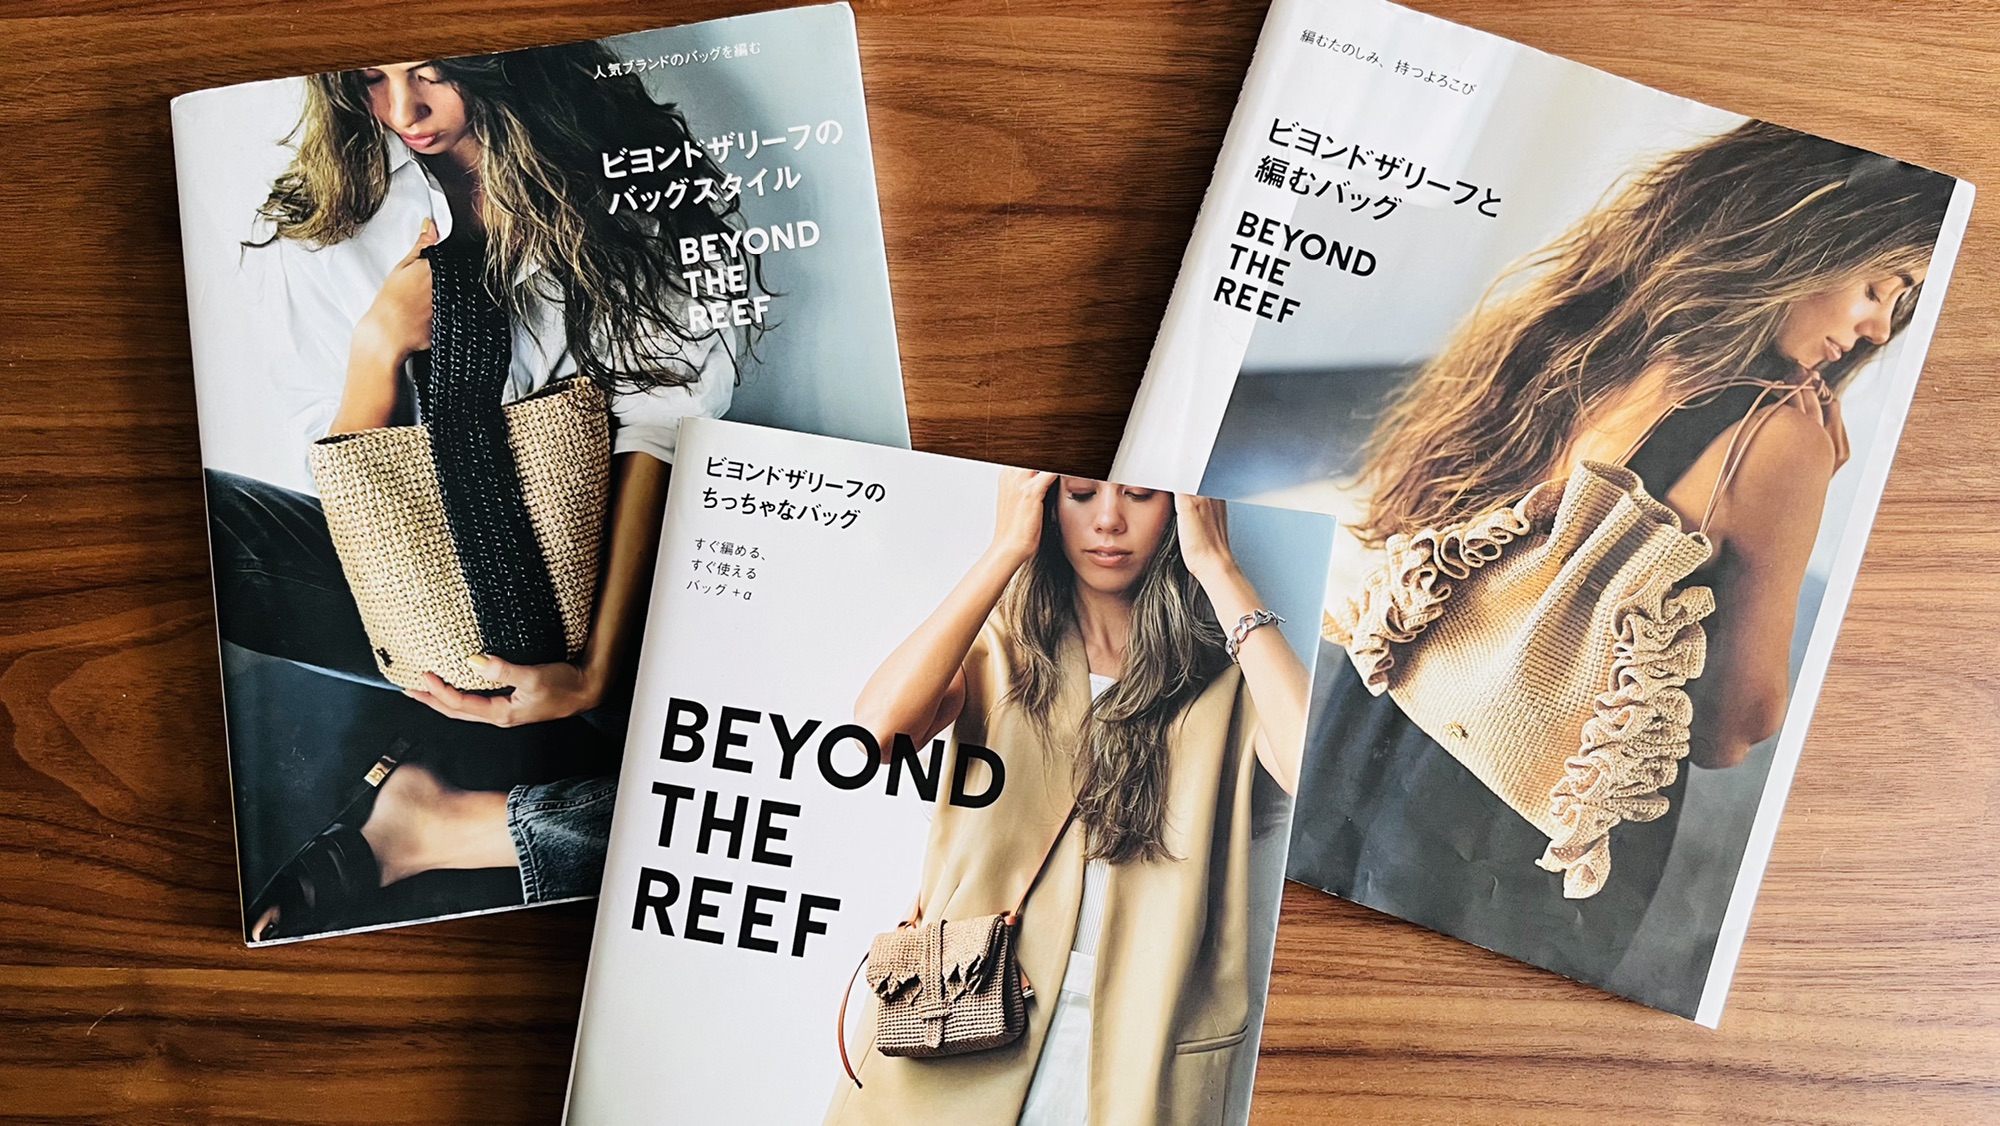 BEYOND THE REEF 書籍掲載作品 | Sumie hand crafted